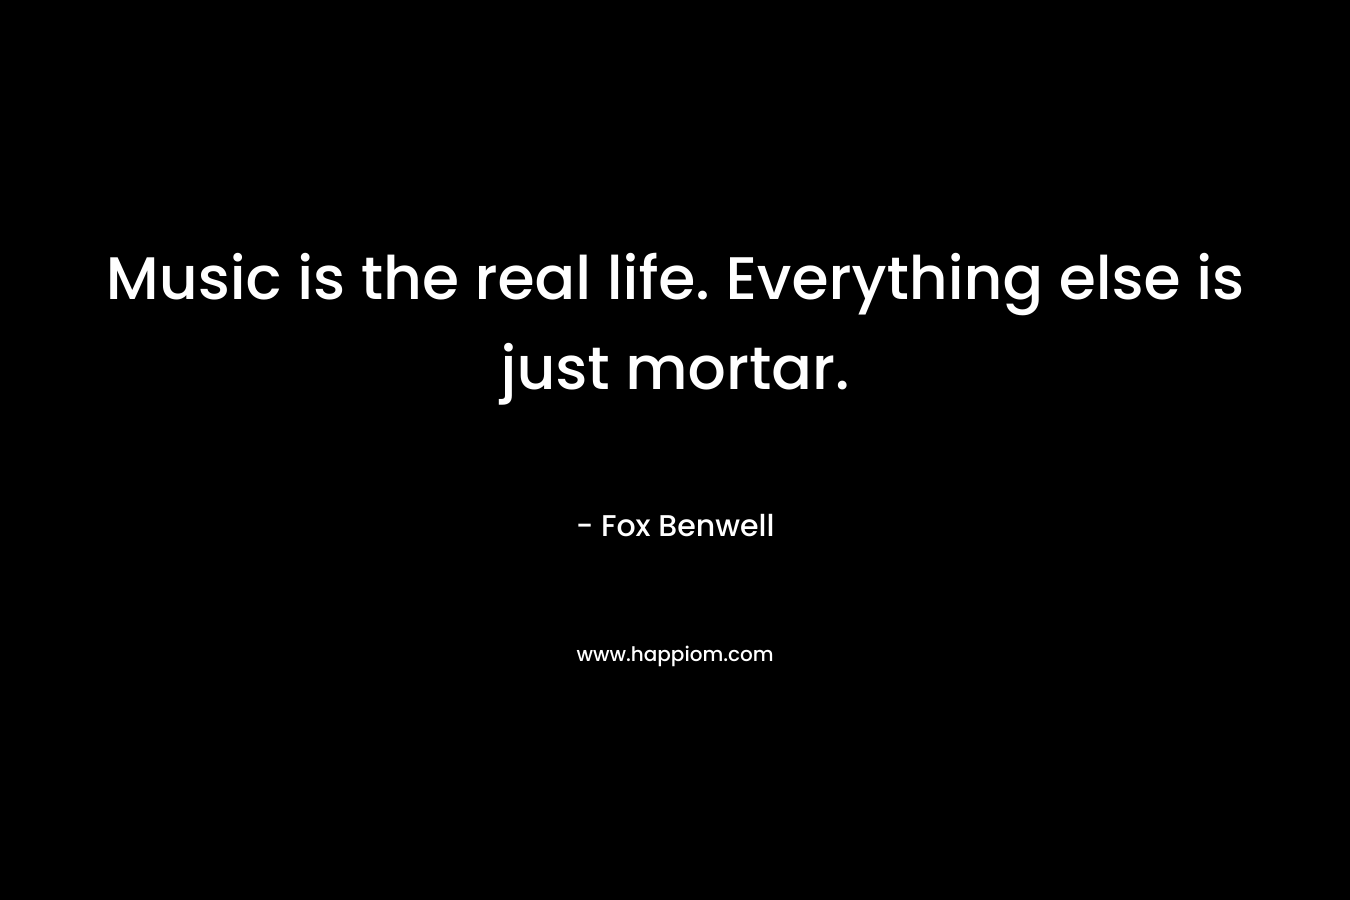 Music is the real life. Everything else is just mortar. – Fox Benwell